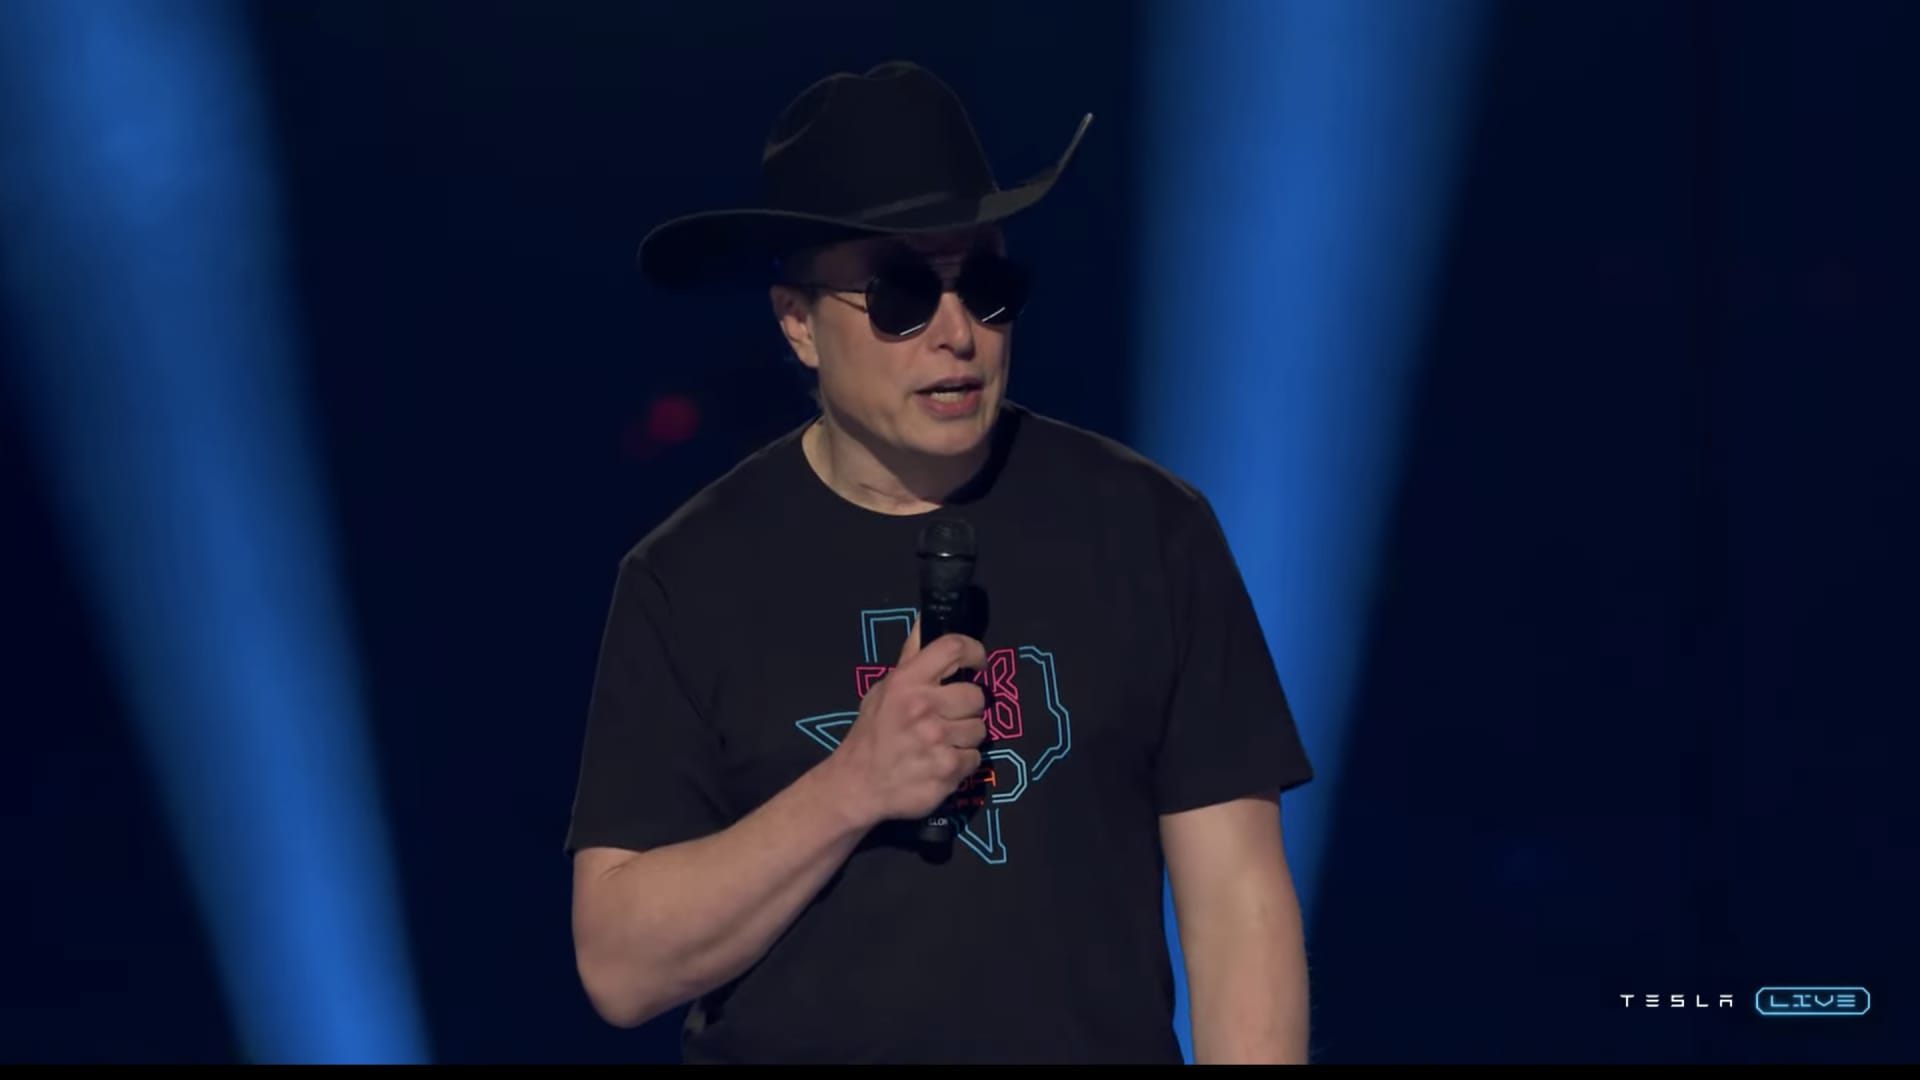 Tesla CEO Elon Musk hosts ‘Cyber Rodeo’ party to open Austin factory